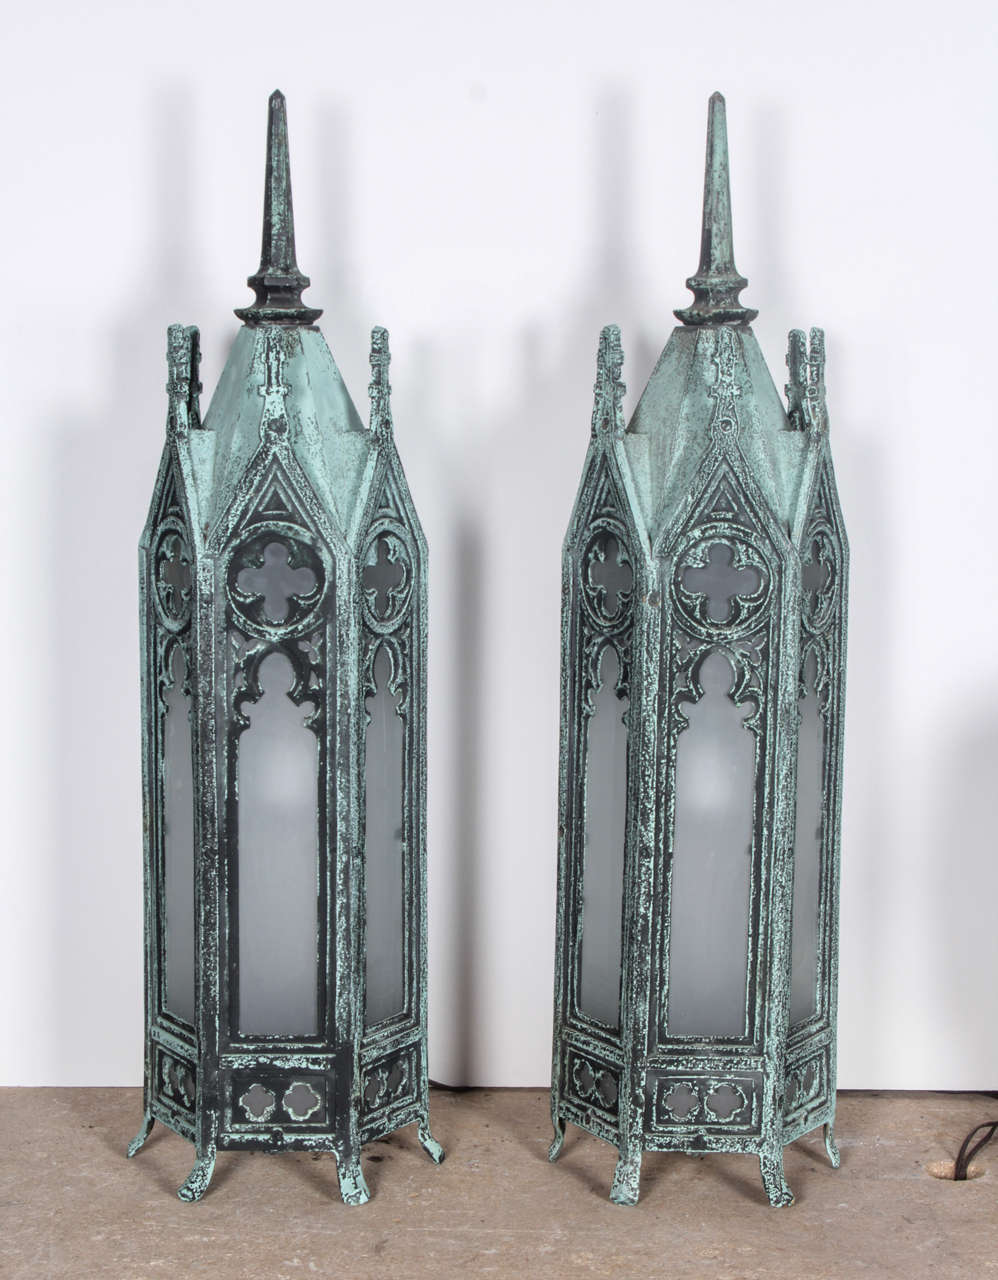 Pair of Gothic table lamps or pier lamps which were originally wall sconces (could still be used as wall sconces). Hexagonal design with fabulous patina. The patina is original and highly textured from decades of weathering.